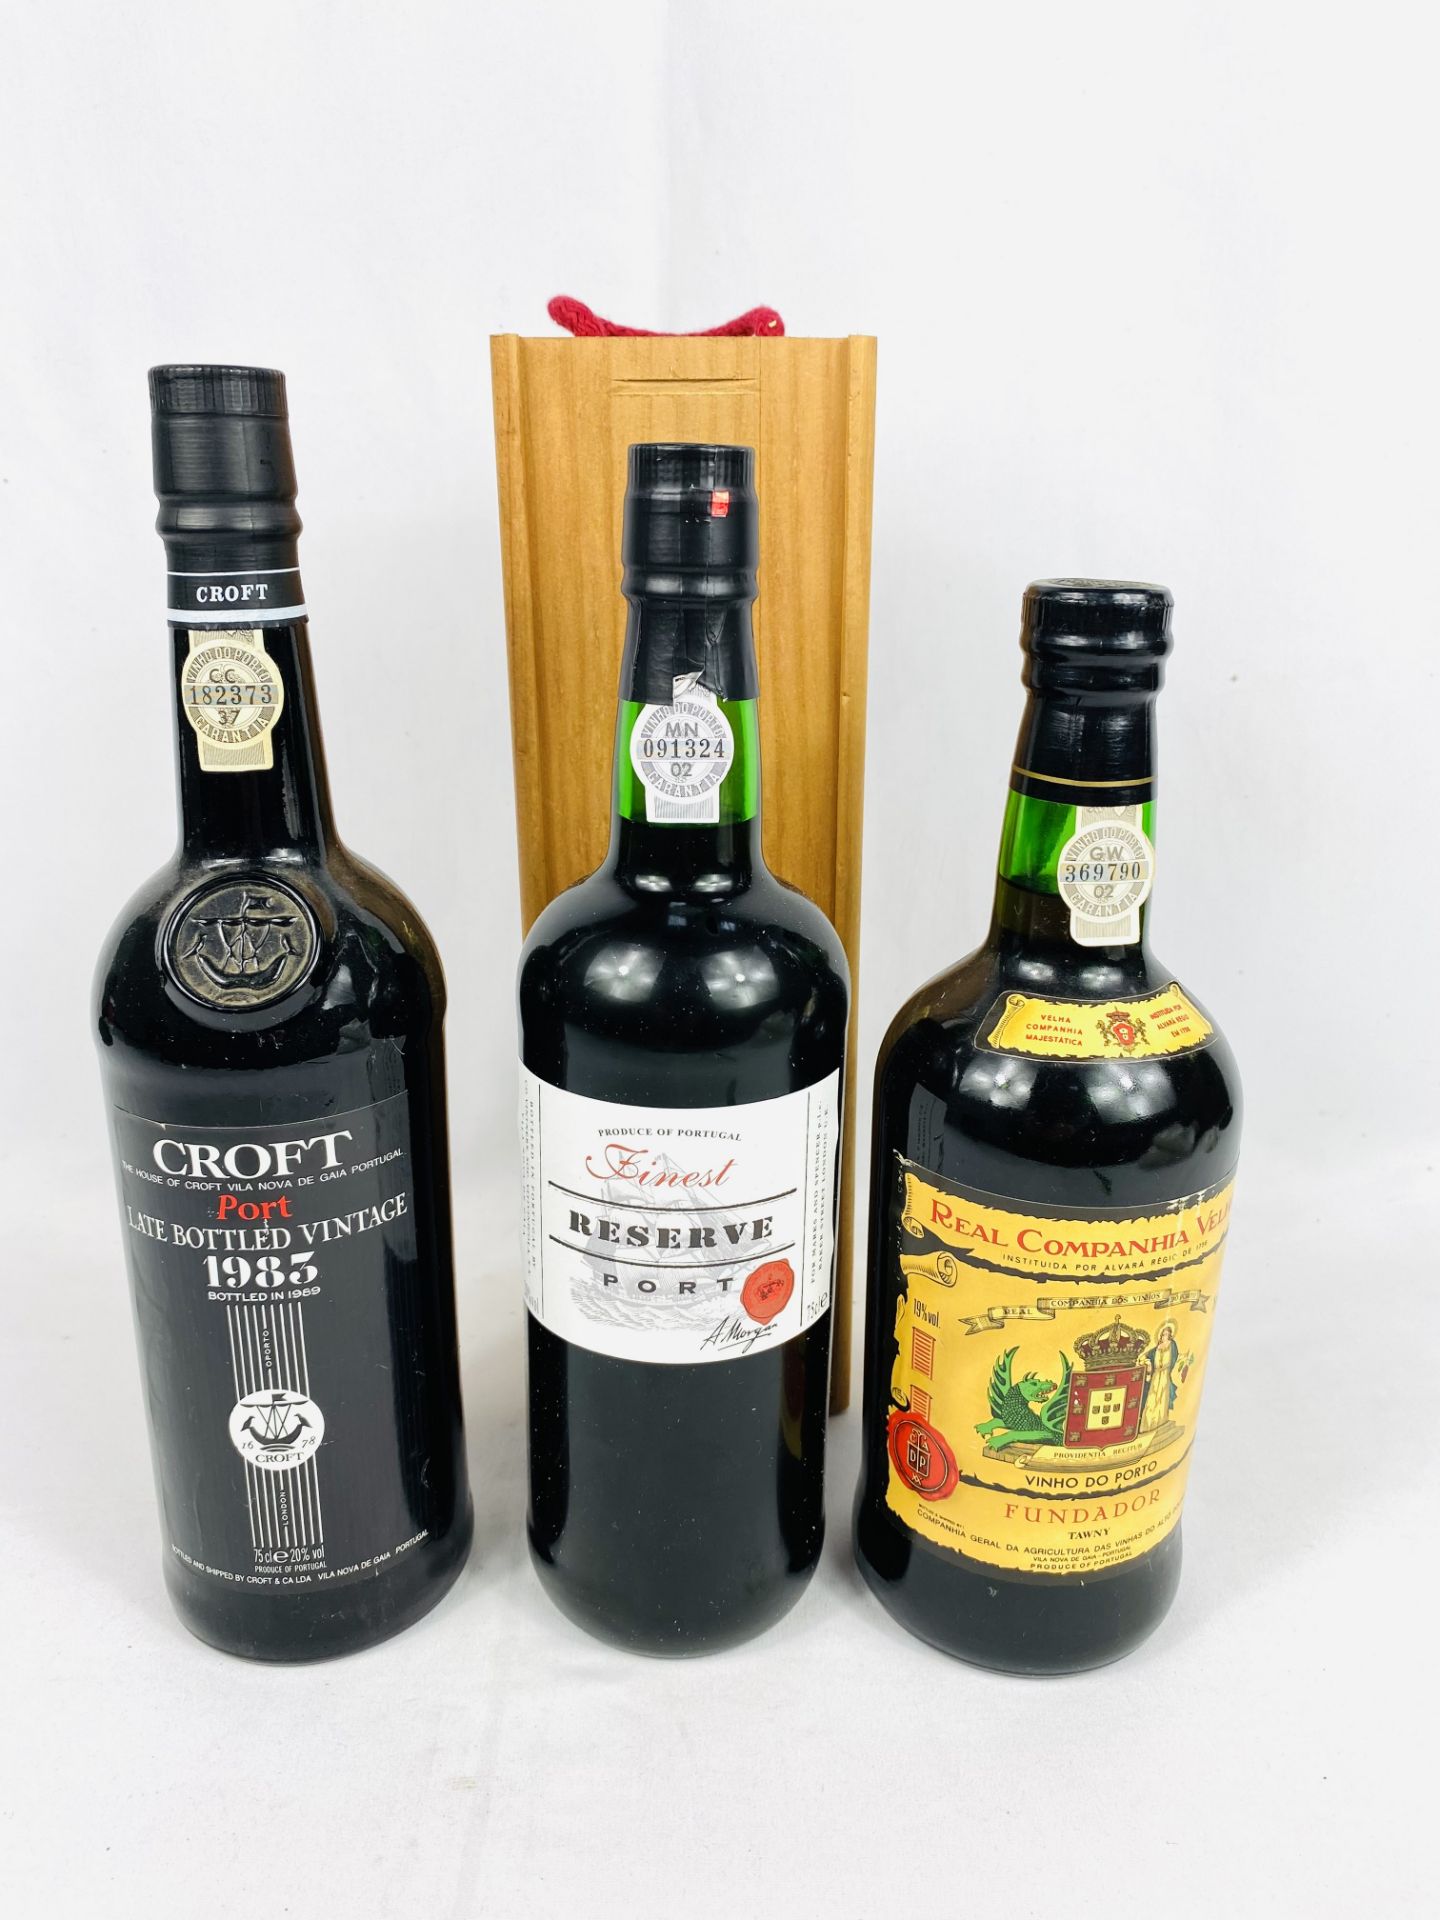 Bottle of Finest Reserve port and two other bottles of port